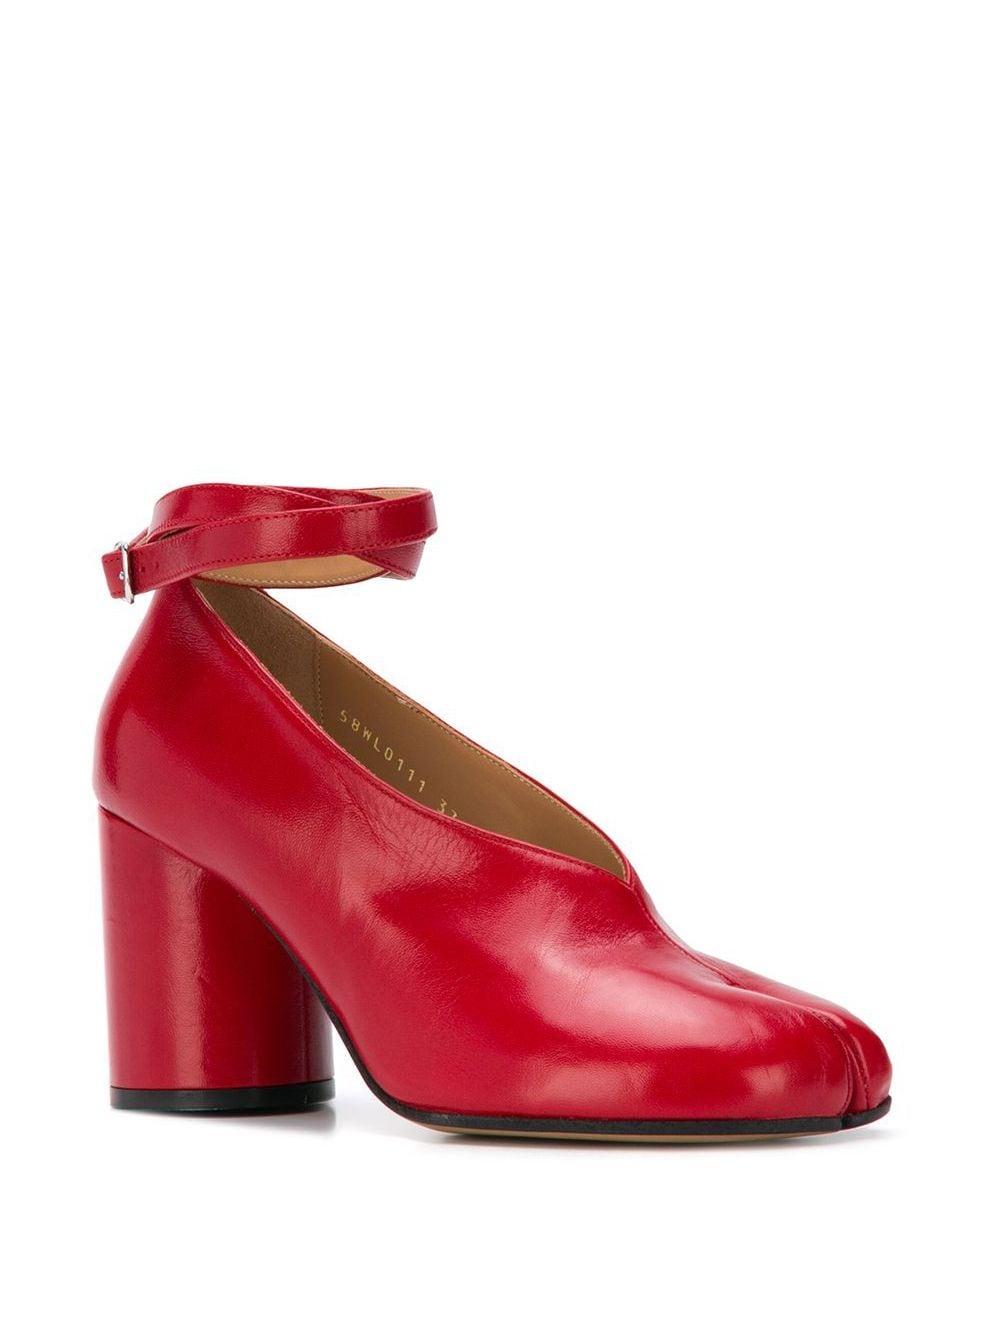 Maison Margiela Leather Tabi Mary Jane Pumps in Red | Lyst